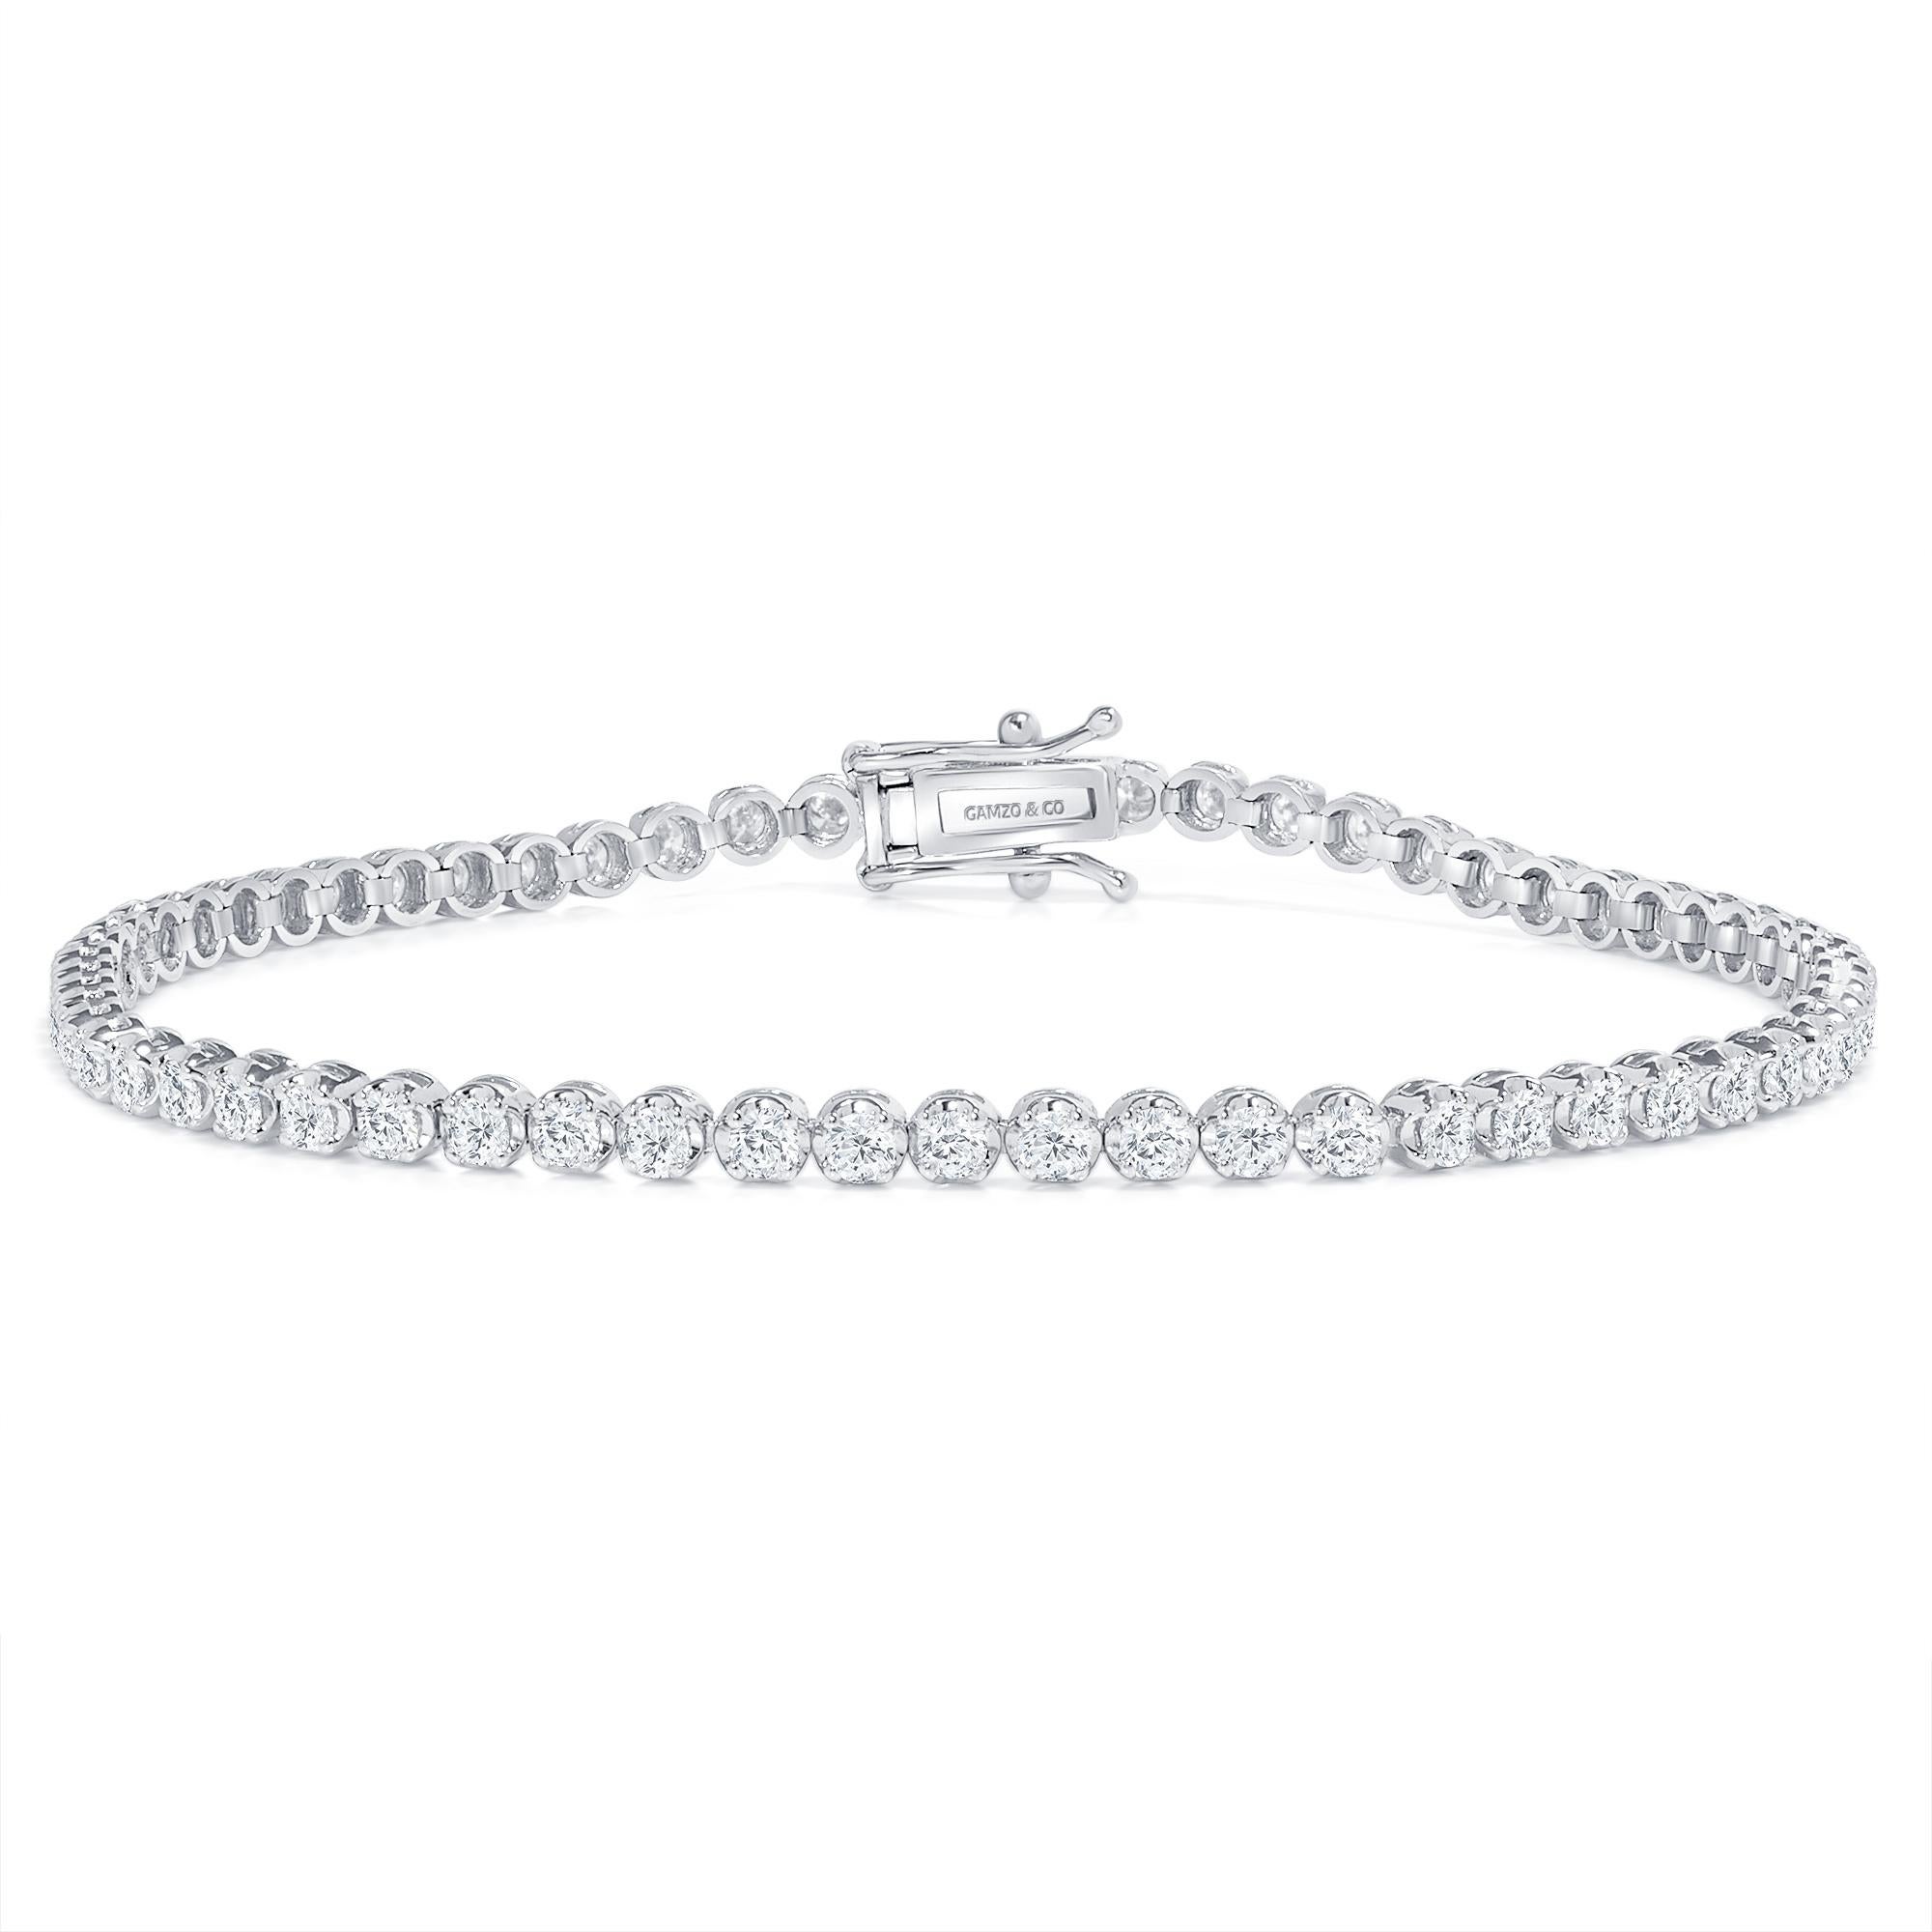 These beautiful round diamonds dance around your wrist as they absorb light and attention.
Metal: 14k Gold
Diamond Cut: Round
Diamond Total Carats: 3ct
Diamond Clarity: VS
Diamond Color: F
Color: White Gold
Bracelet Length: 5 Inches 
Included with